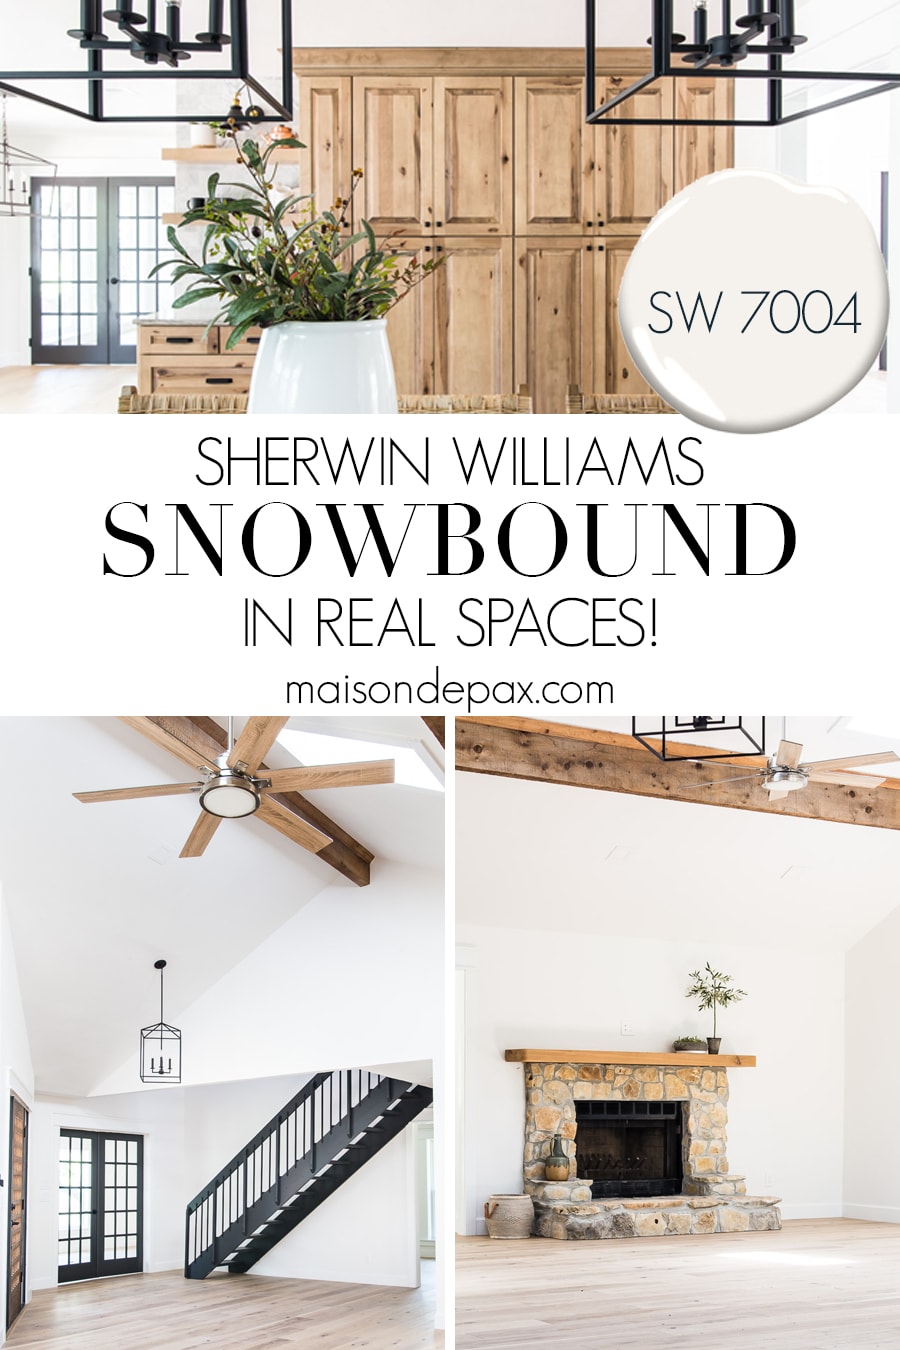 SW 7004 Snowbound in real spaces